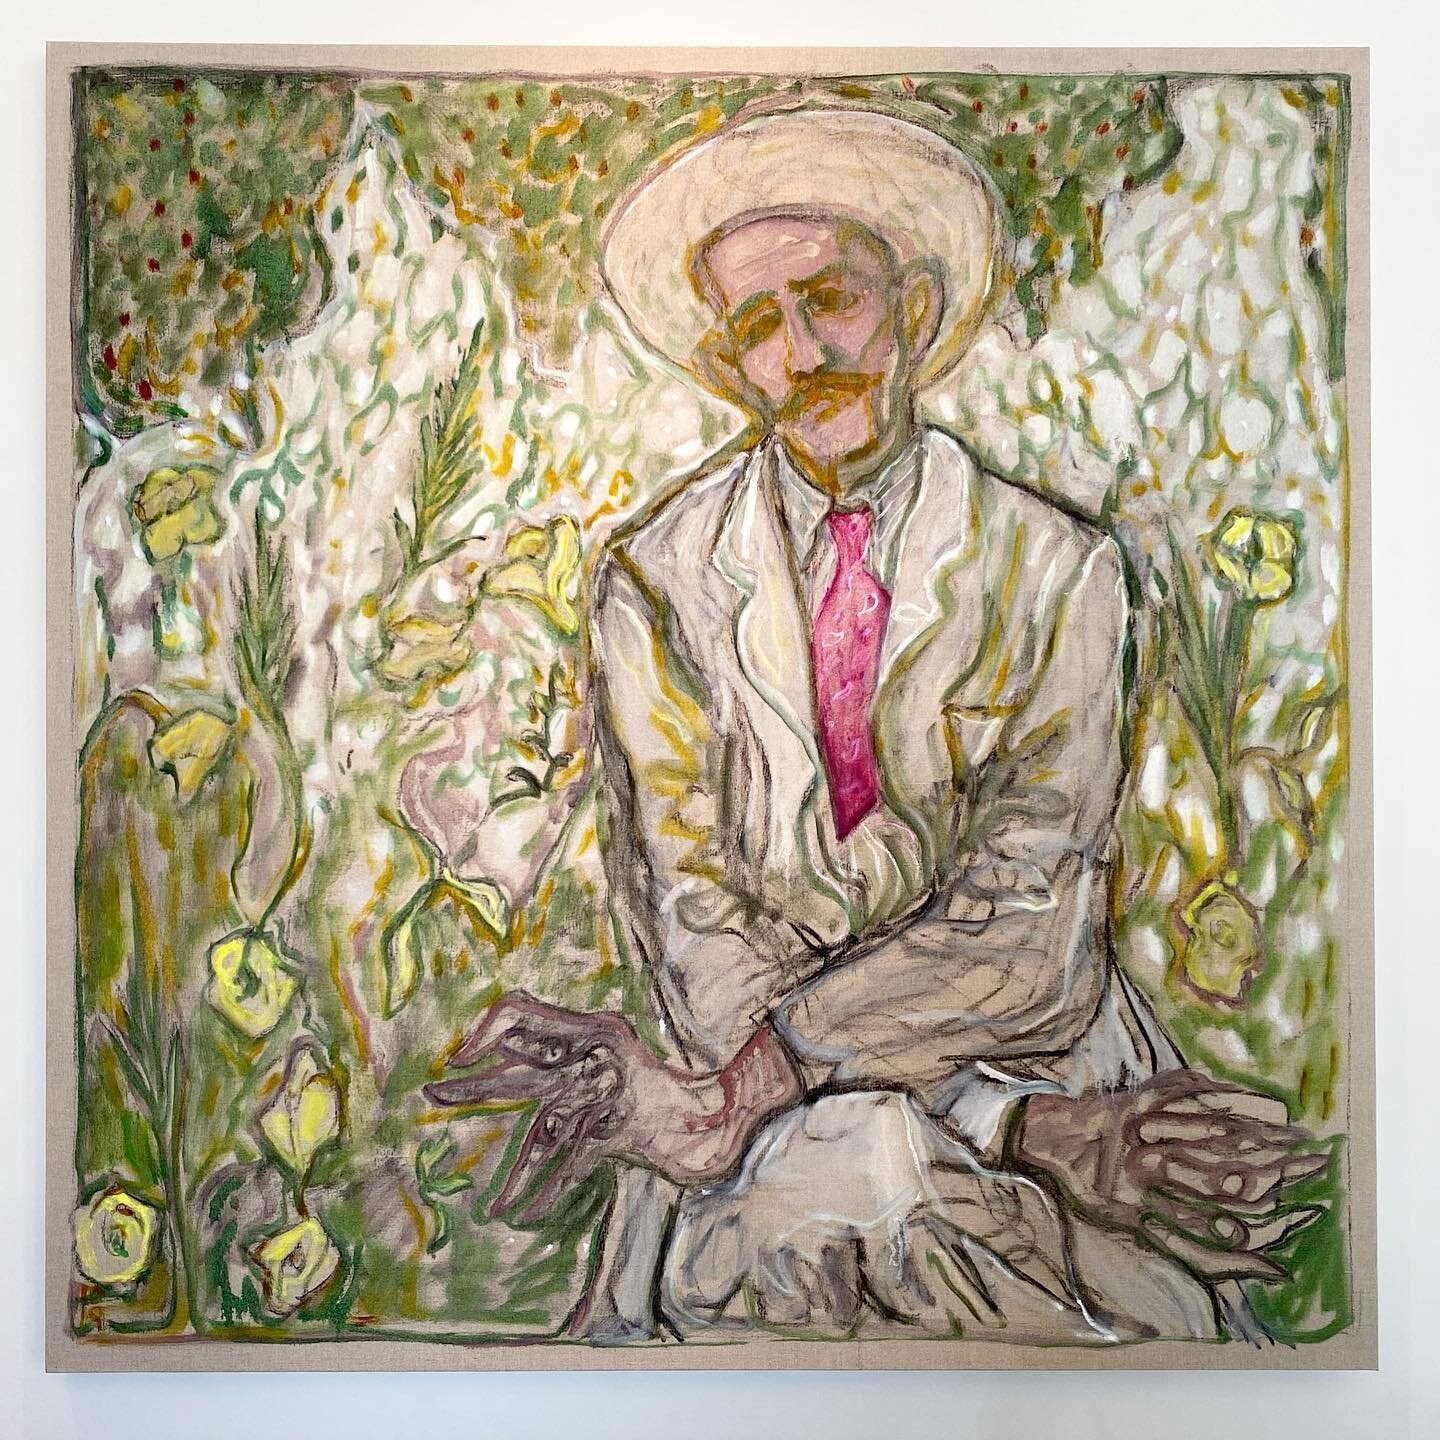 R E C E N T L Y  I N S T A L L E D ⚡️⚡️❤️❤️ Billy Childish &lsquo;Man Sat With Cross Arms&rsquo; from his show &lsquo;remember all the / high and exalted things / remember all the low / and broken things&rsquo;  @lehmannmaupin We love the texture and